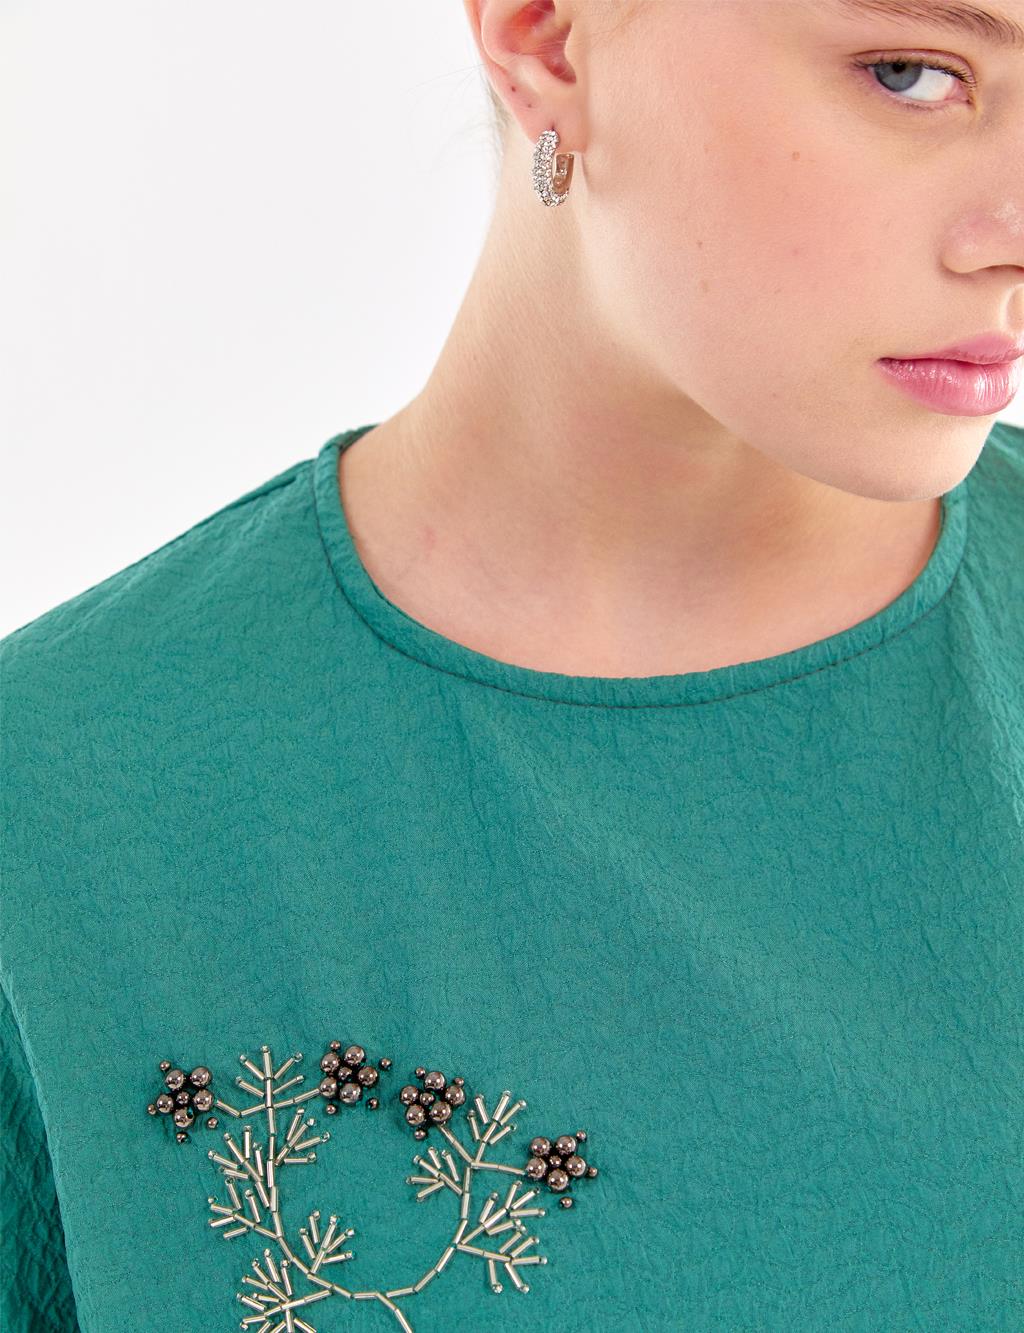 Embroidered Relief Pattern Tunic Lake Green